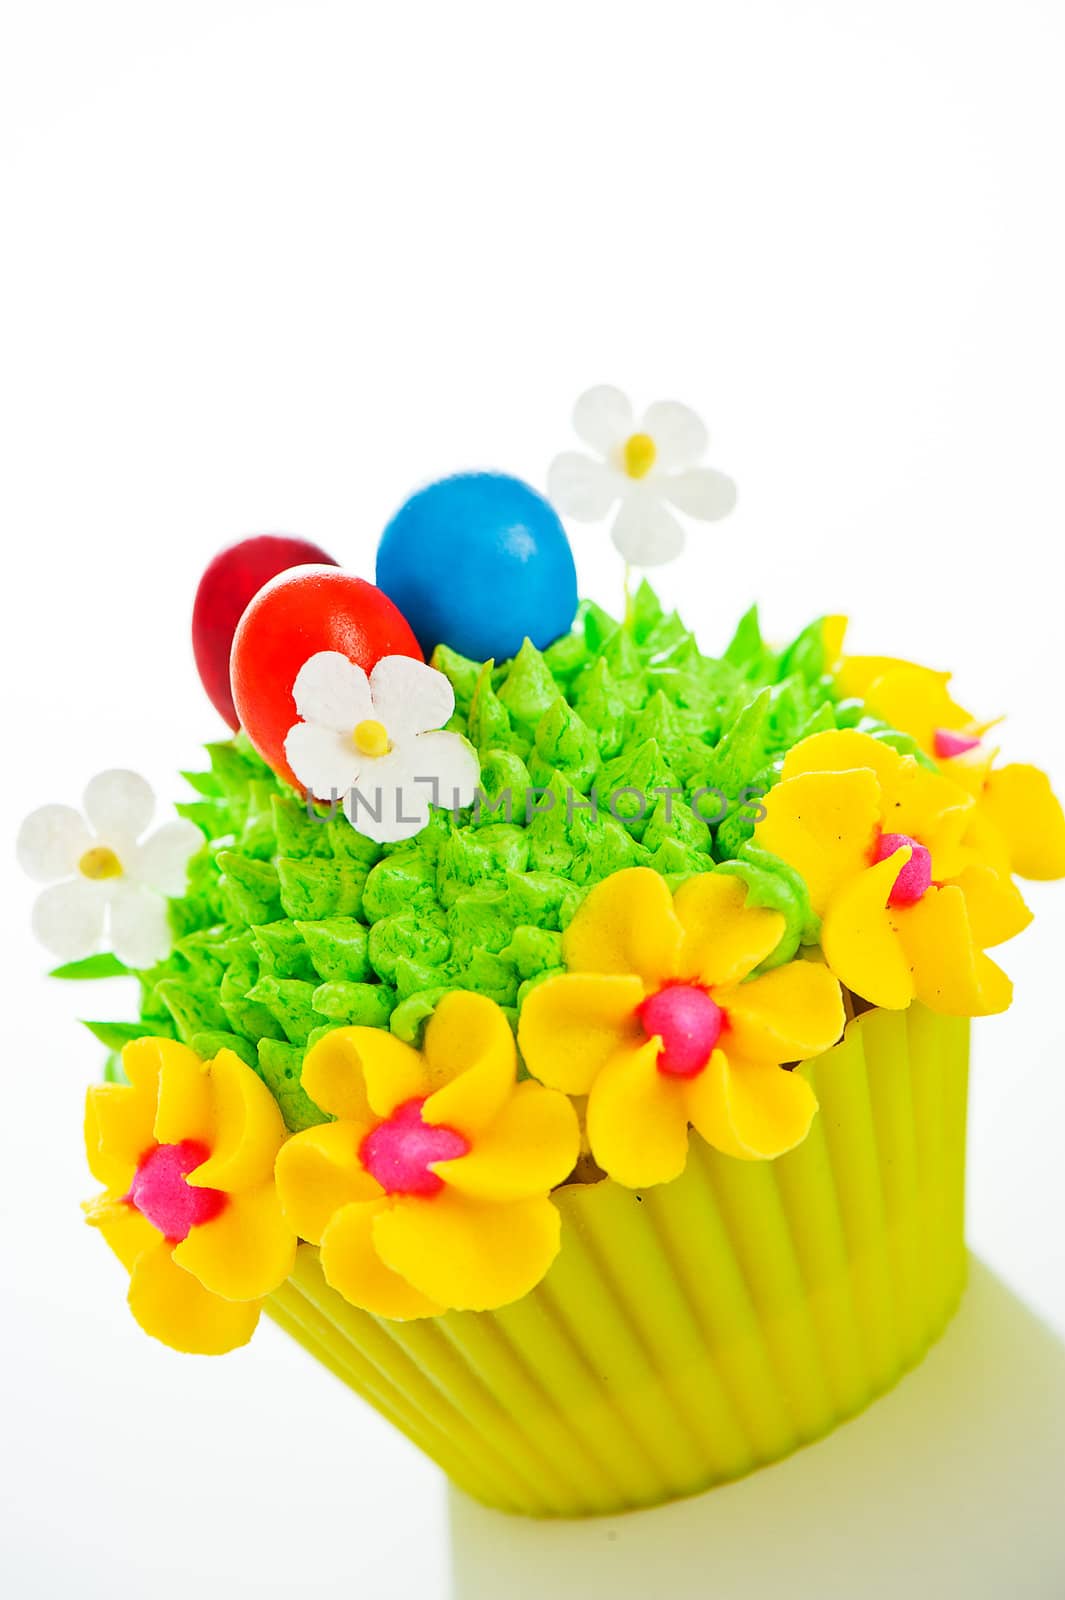 Happy easter cupcake with chocolate egg and cream grass as a meadow with flowers on white background